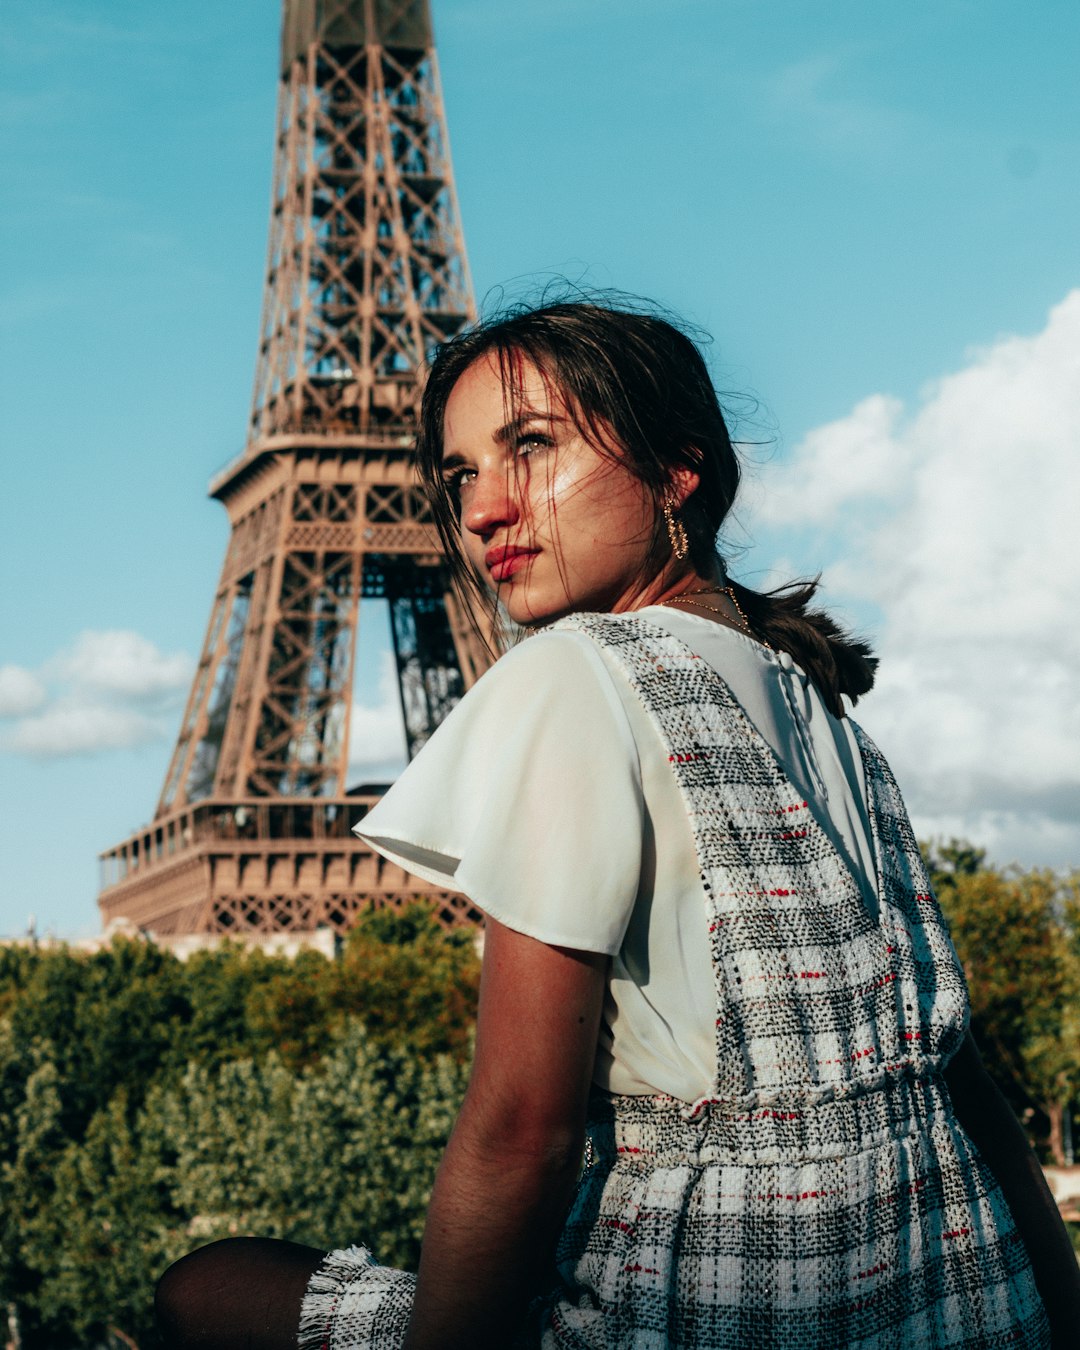 woman in white and black plaid shirt standing near eiffel tower during daytime